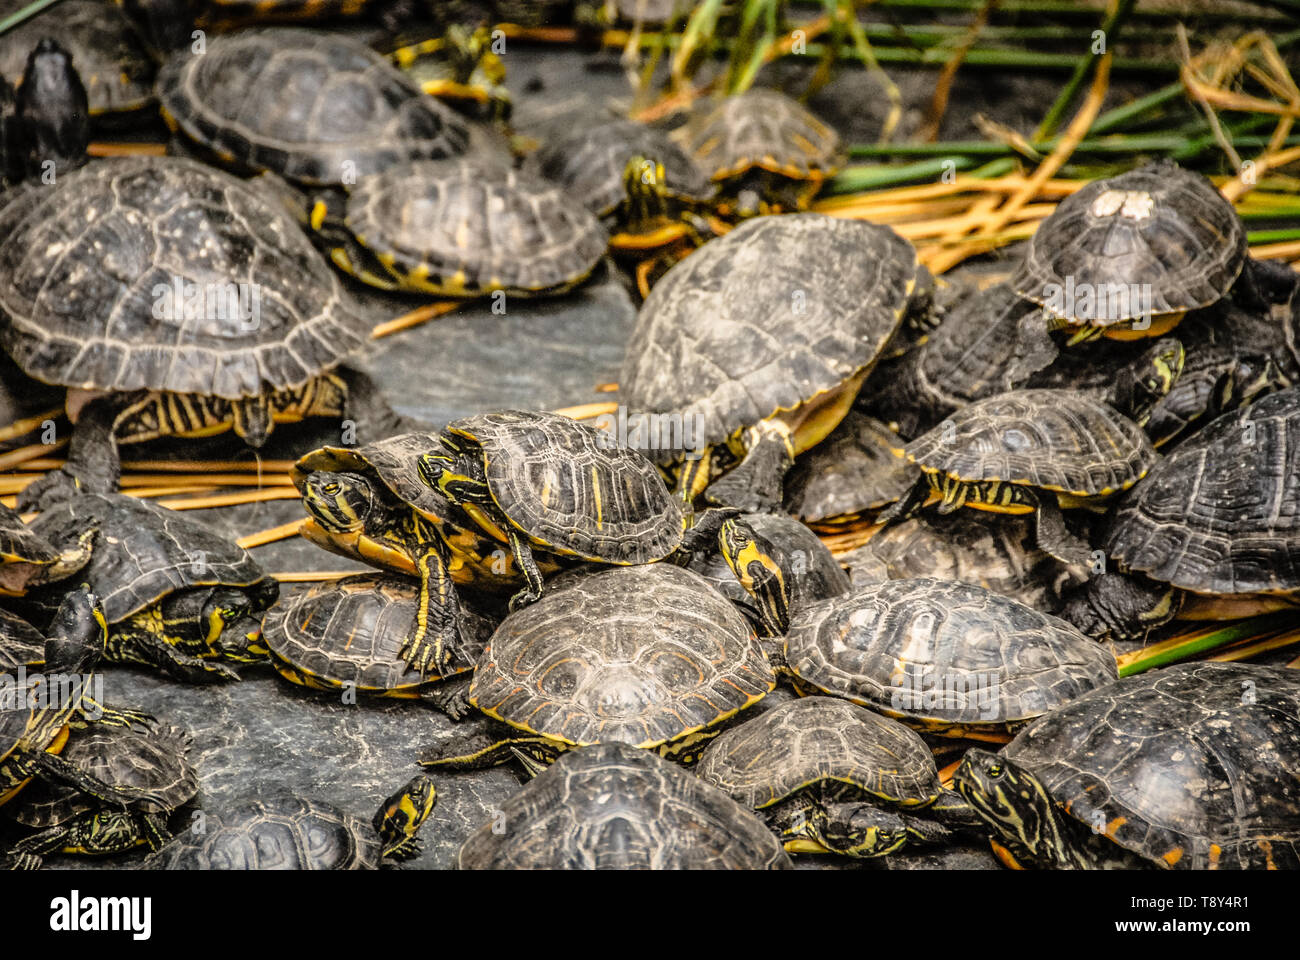 A large group (bale) of European Turtles. Stock Photo